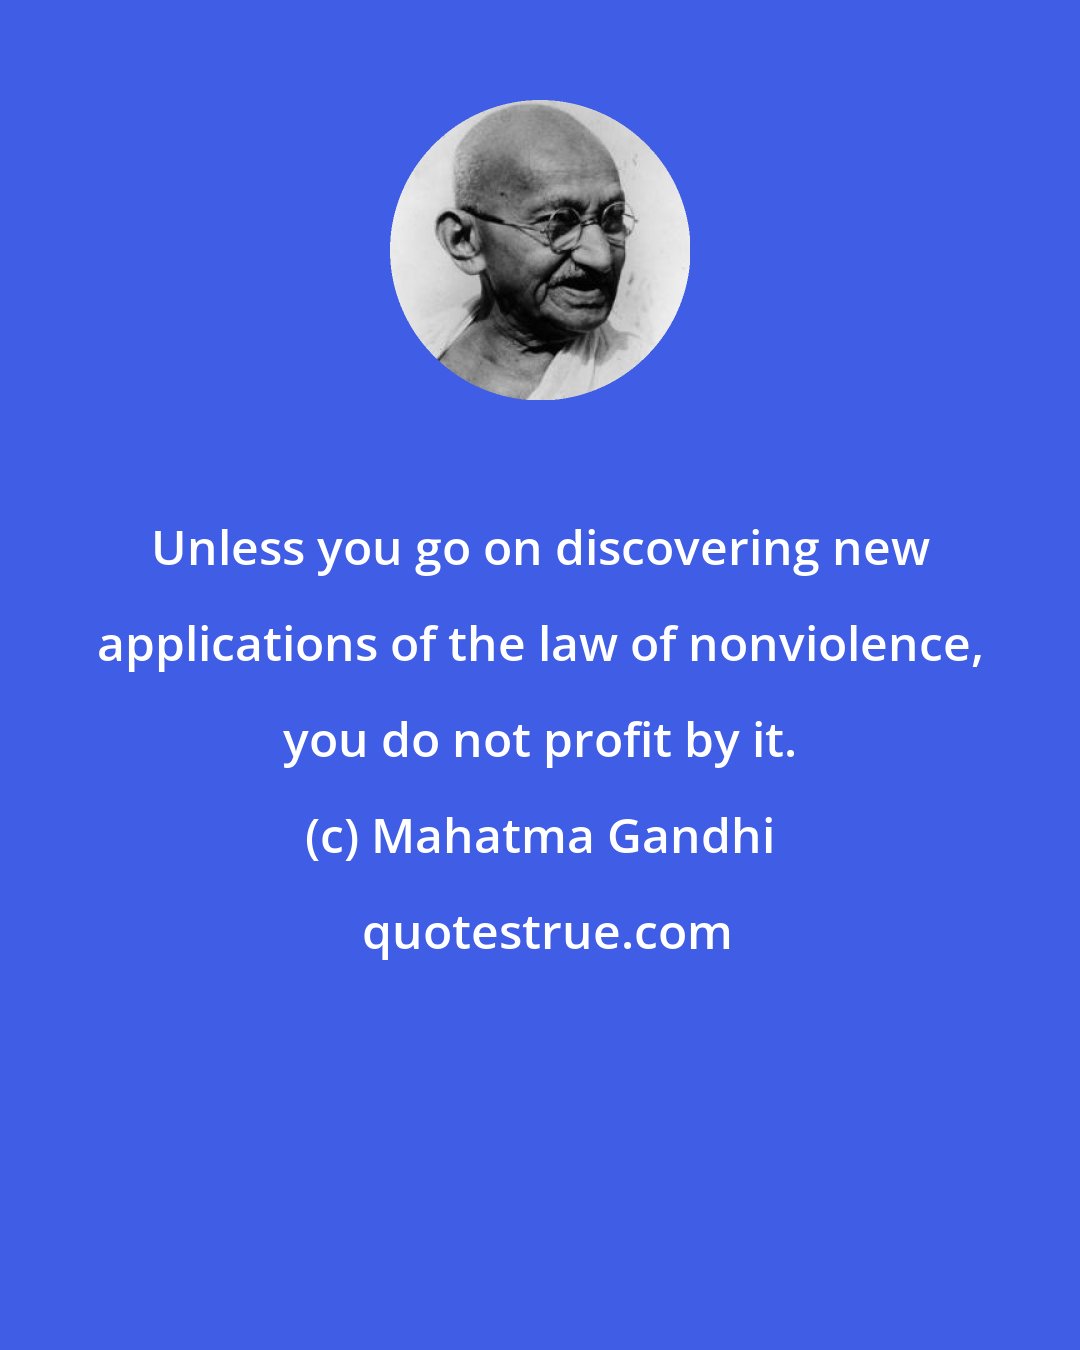 Mahatma Gandhi: Unless you go on discovering new applications of the law of nonviolence, you do not profit by it.